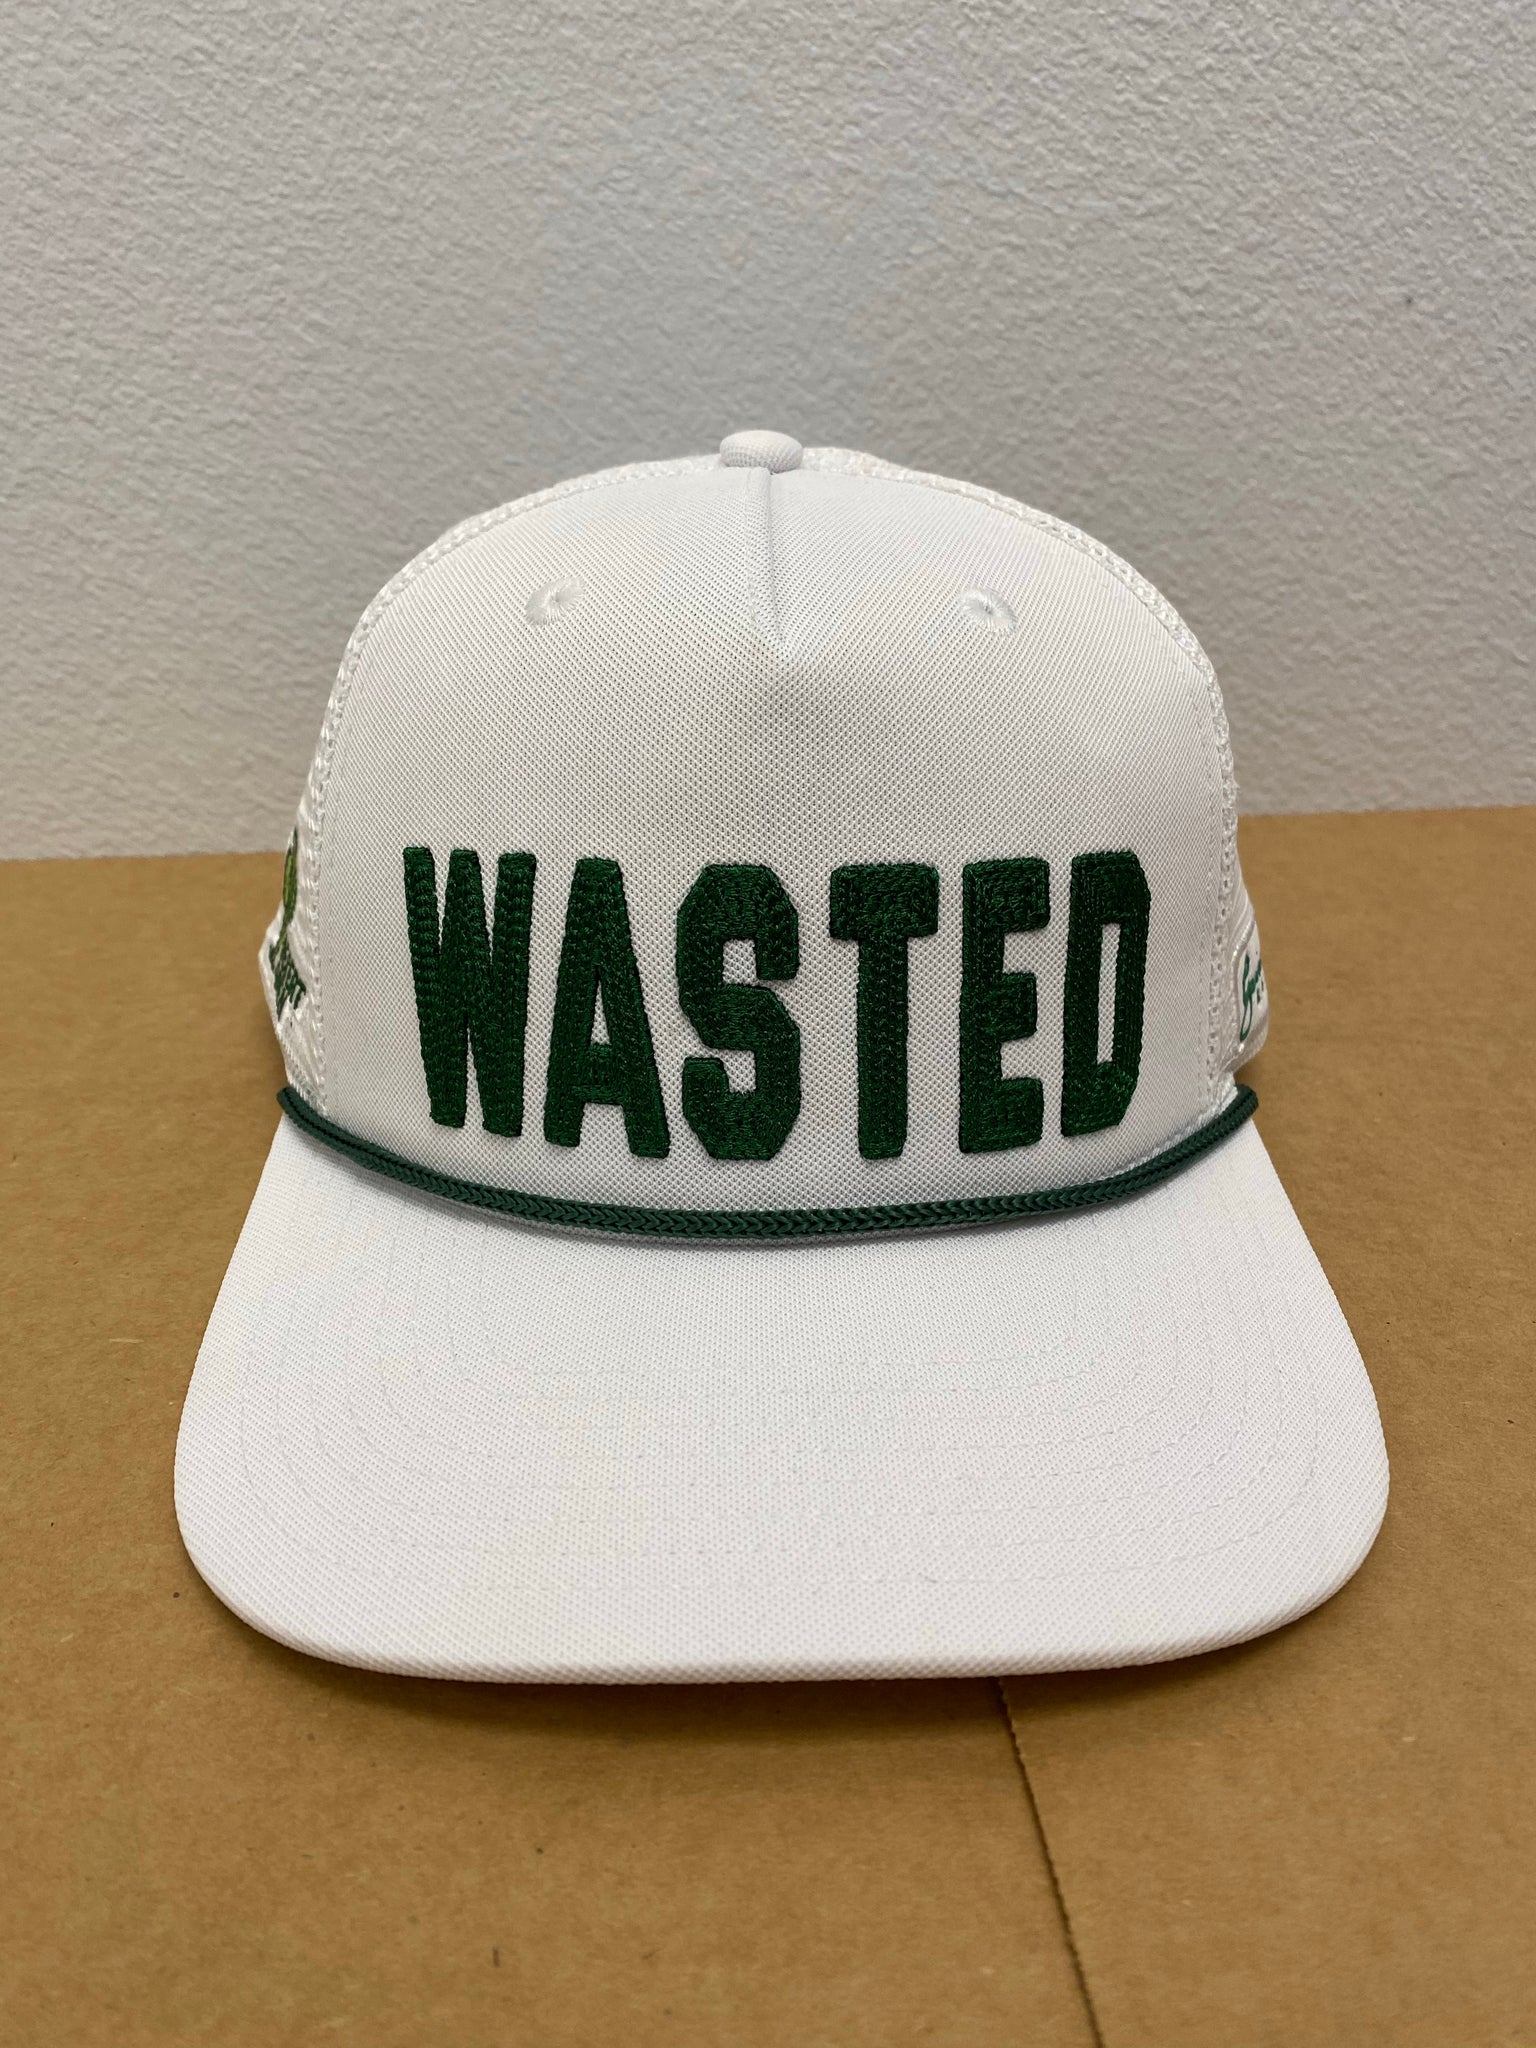 WaStEd Management ROPE Snapback Flat Bill WHITE – Grindin' Golf Co.